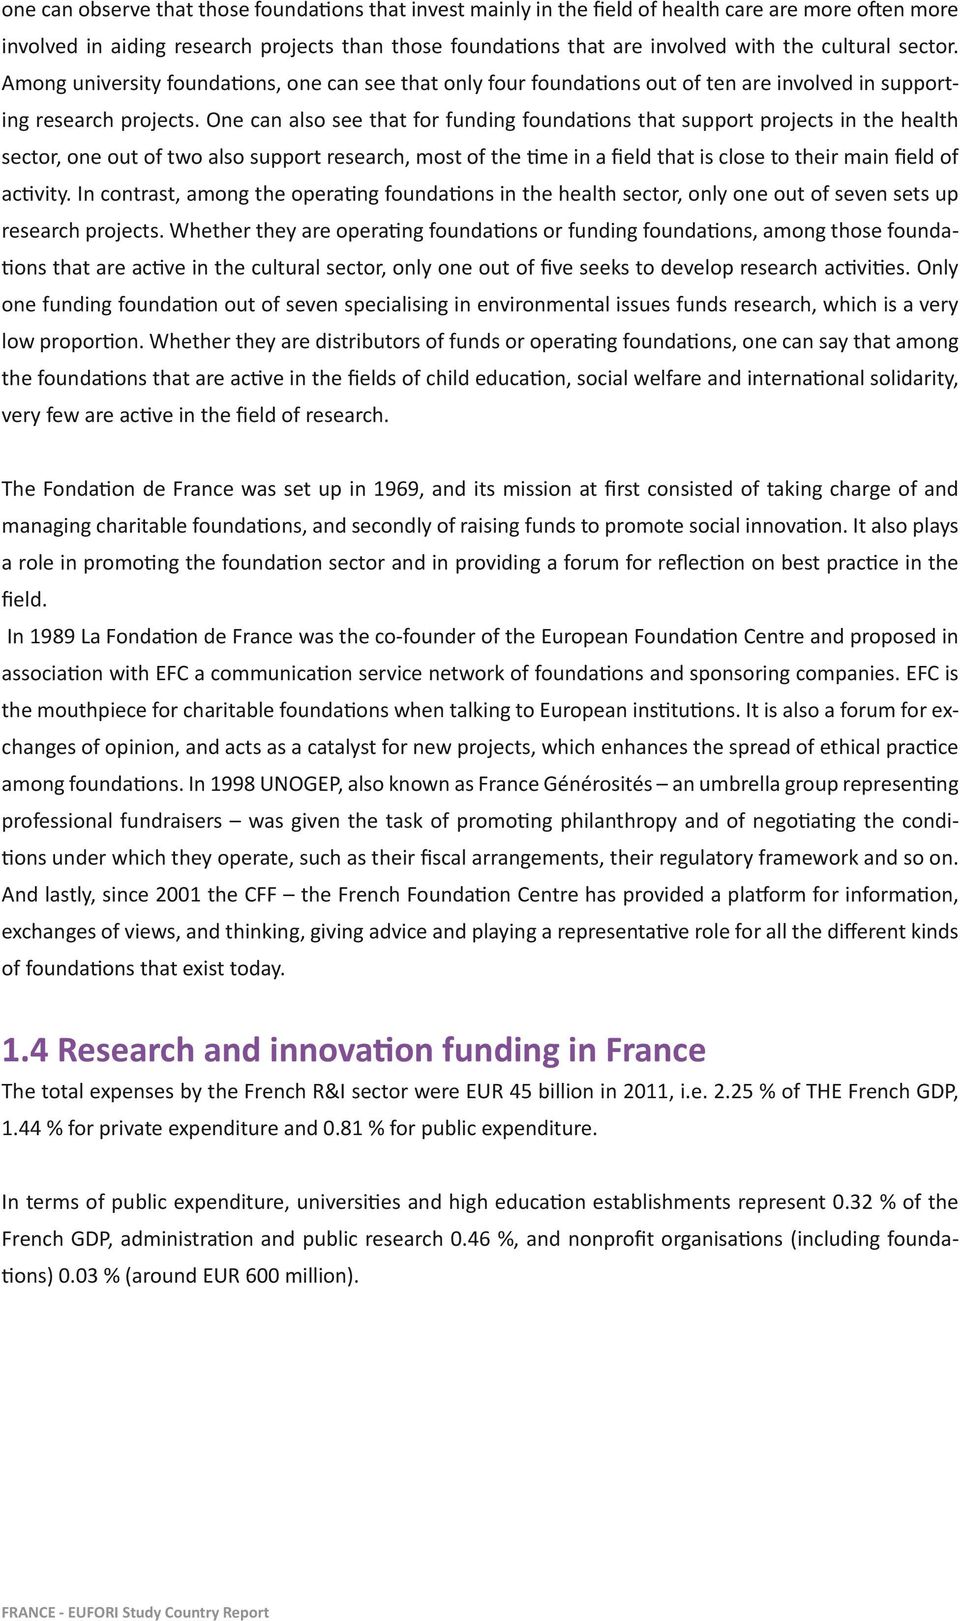 One can also see that for funding foundations that support projects in the health sector, one out of two also support research, most of the time in a field that is close to their main field of